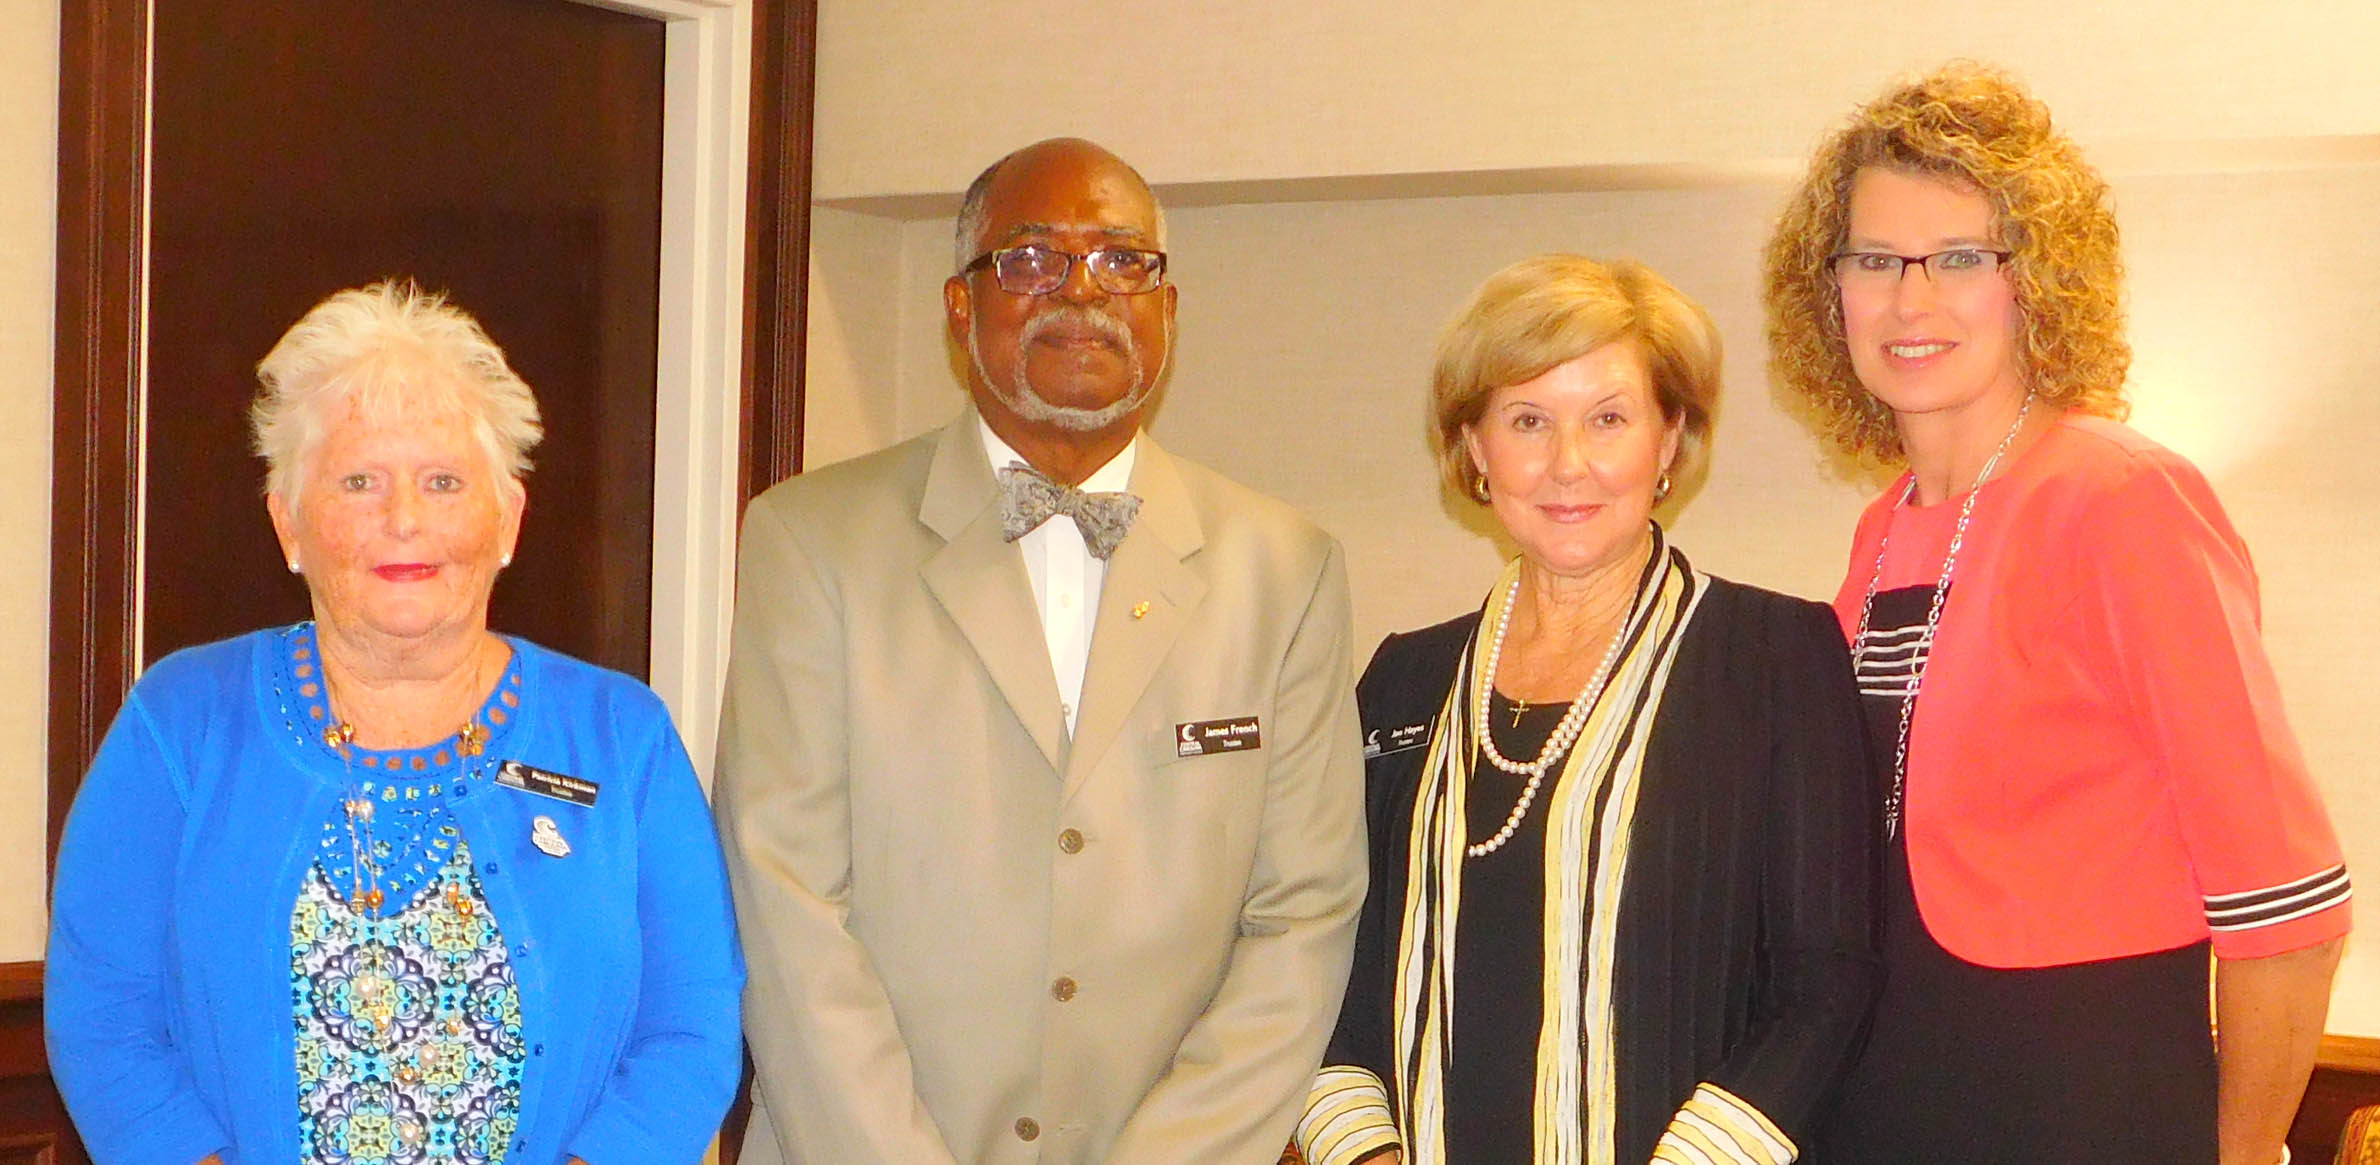 Click to enlarge,  Central Carolina Community College's reappointed Trustees were sworn in at the CCCC Board of Trustees' meeting on Wednesday, July 24. Susie K. Thomas (right), Clerk of Superior Court in Lee County, conducted the ceremony. Being sworn in were, left to right: Trustees Patricia Kirkman, James French, and Jan Hayes. 